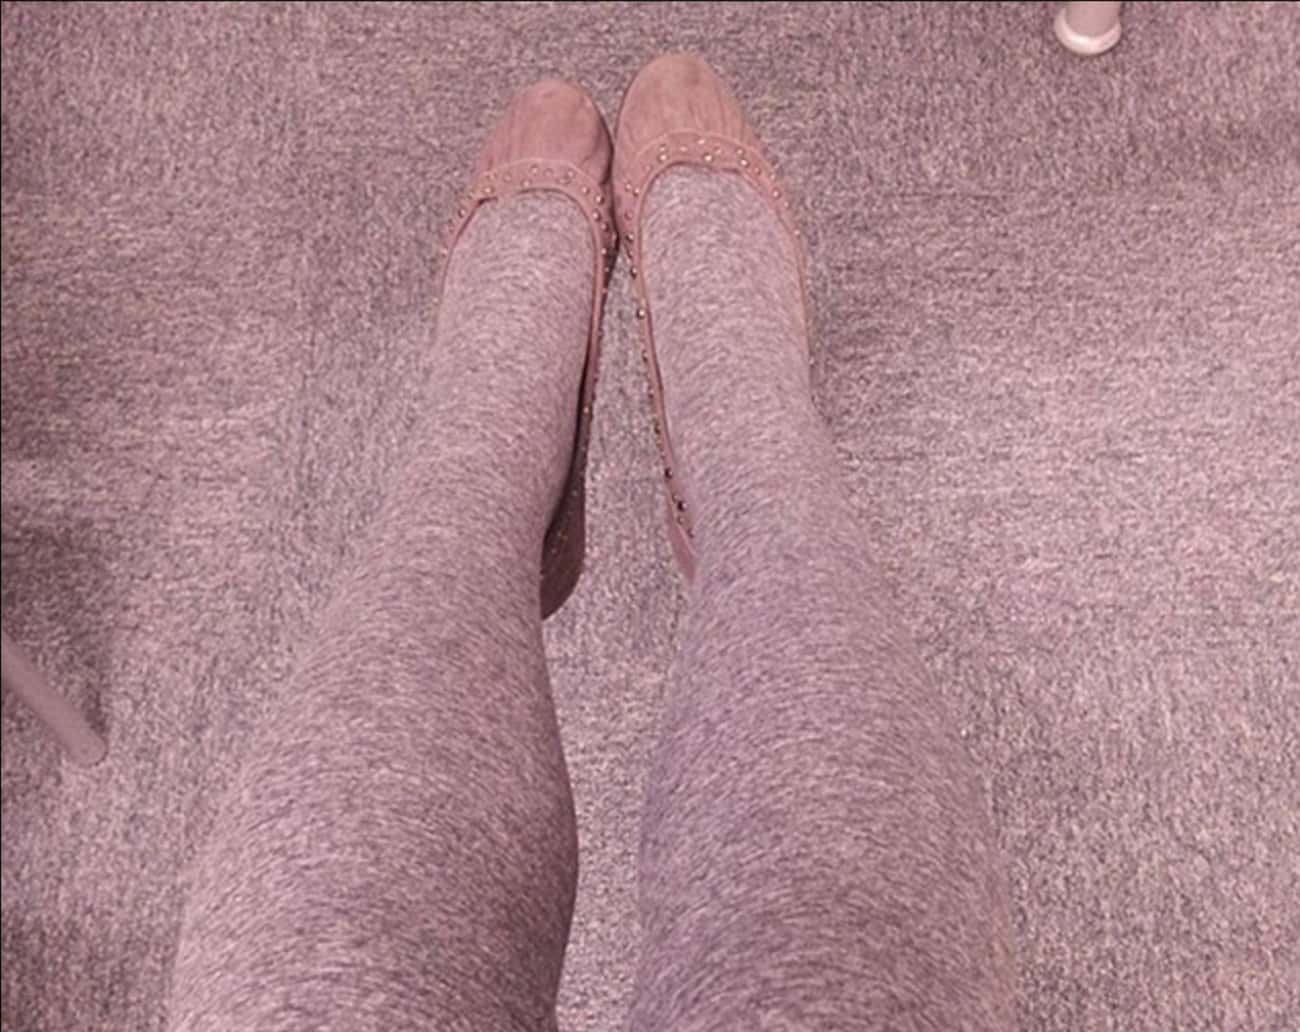 This Woman Who Sadly Lost Her Legs in a Sea of Carpet